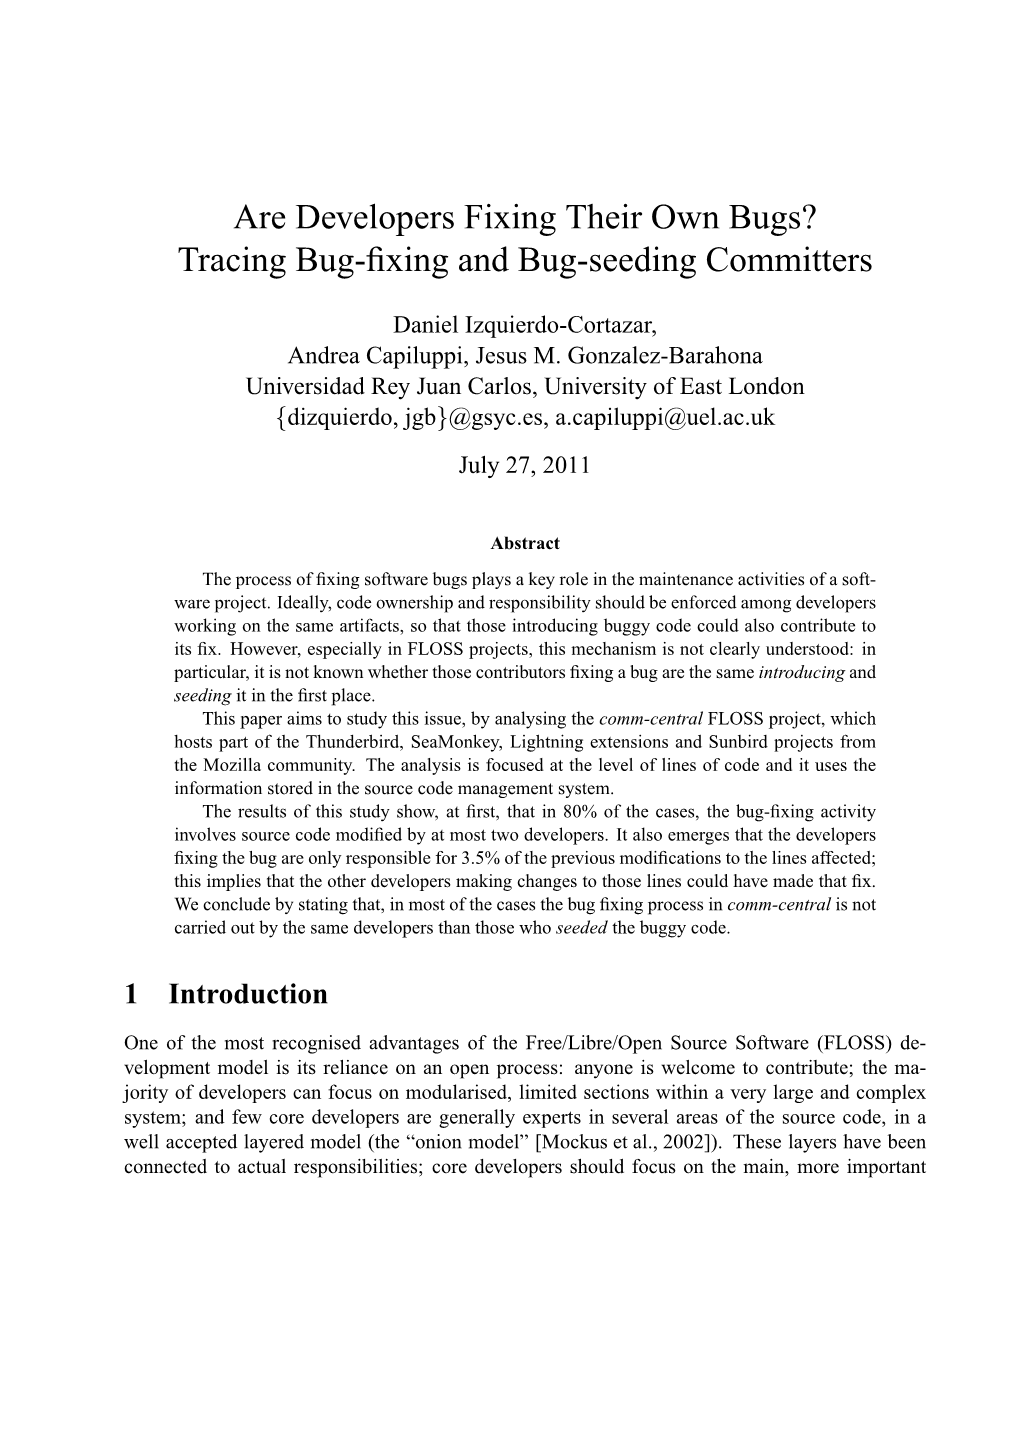 Are Developers Fixing Their Own Bugs? Tracing Bug-Fixing and Bug-Seeding Committers